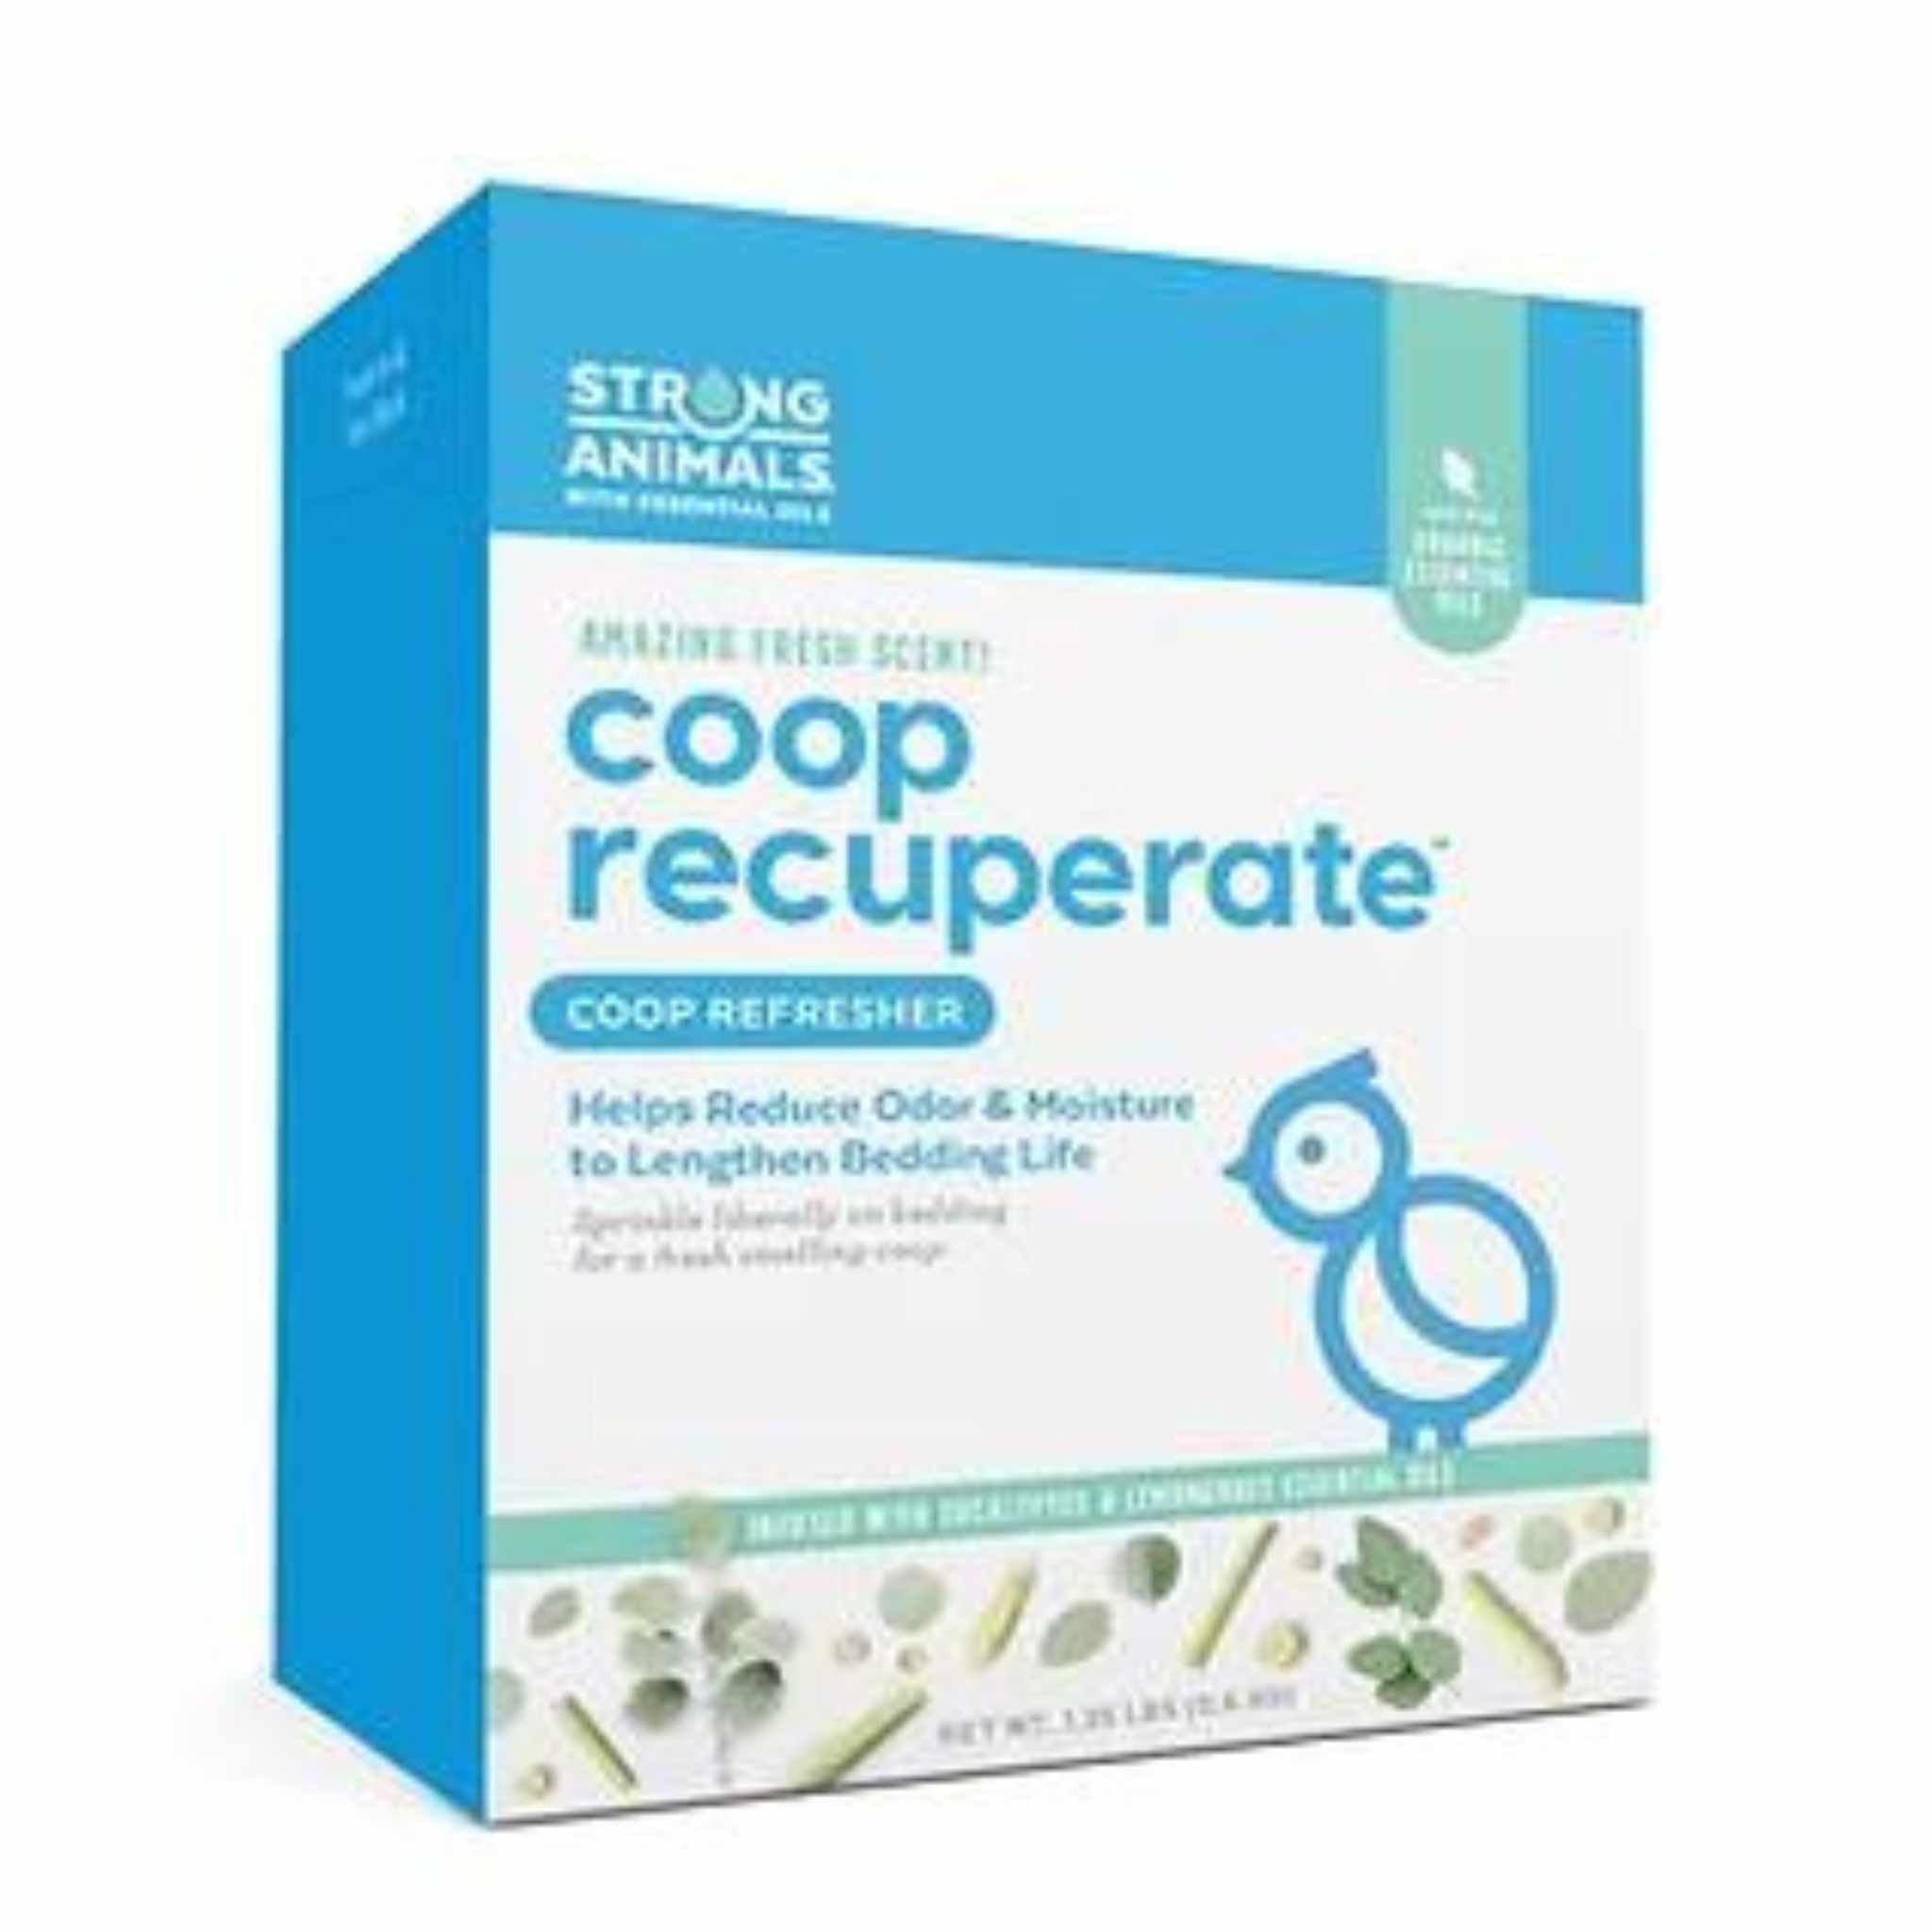 Hatching Time Strong Animals. Coop Recuperate coop refresher can be seen. Helps reduce odor and moisture.